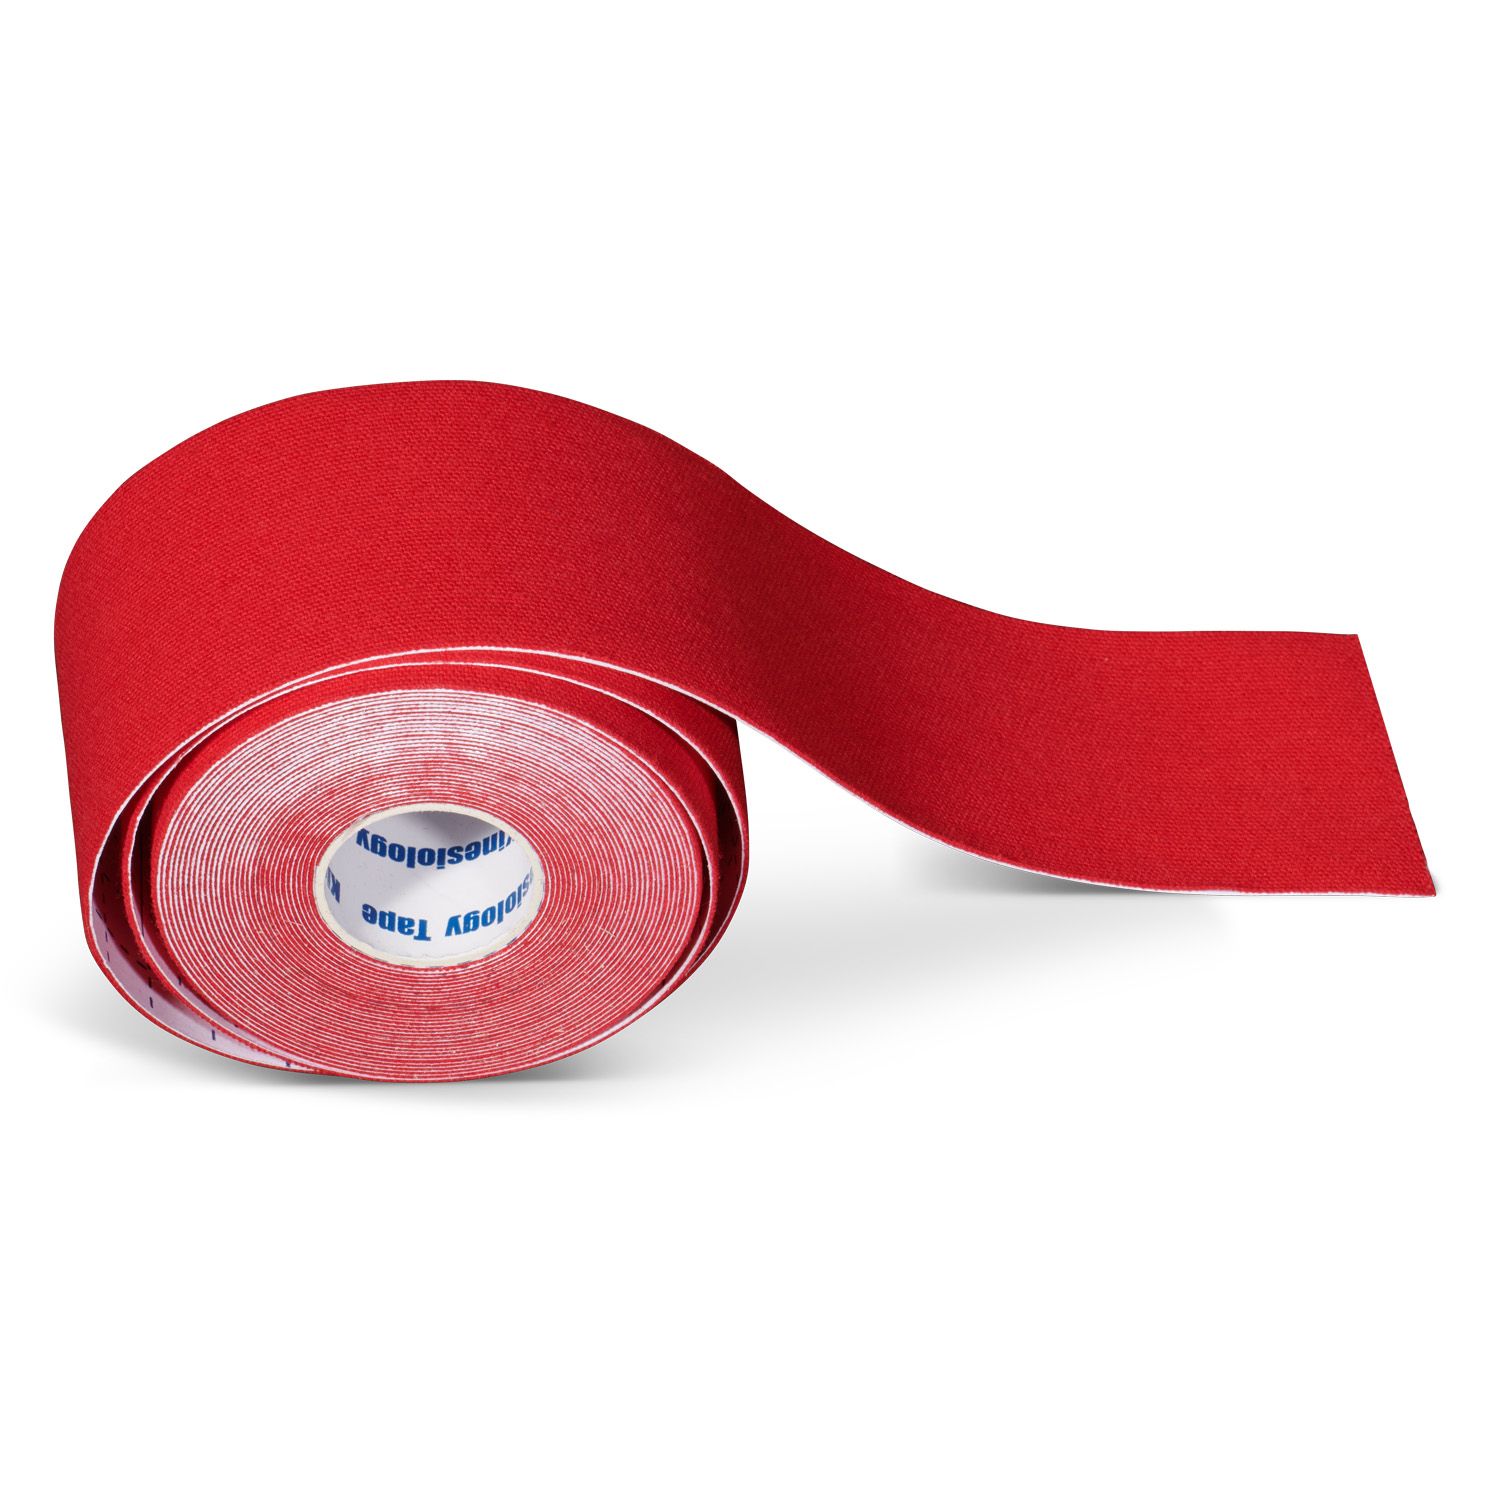 Kinesiology tape per roll red